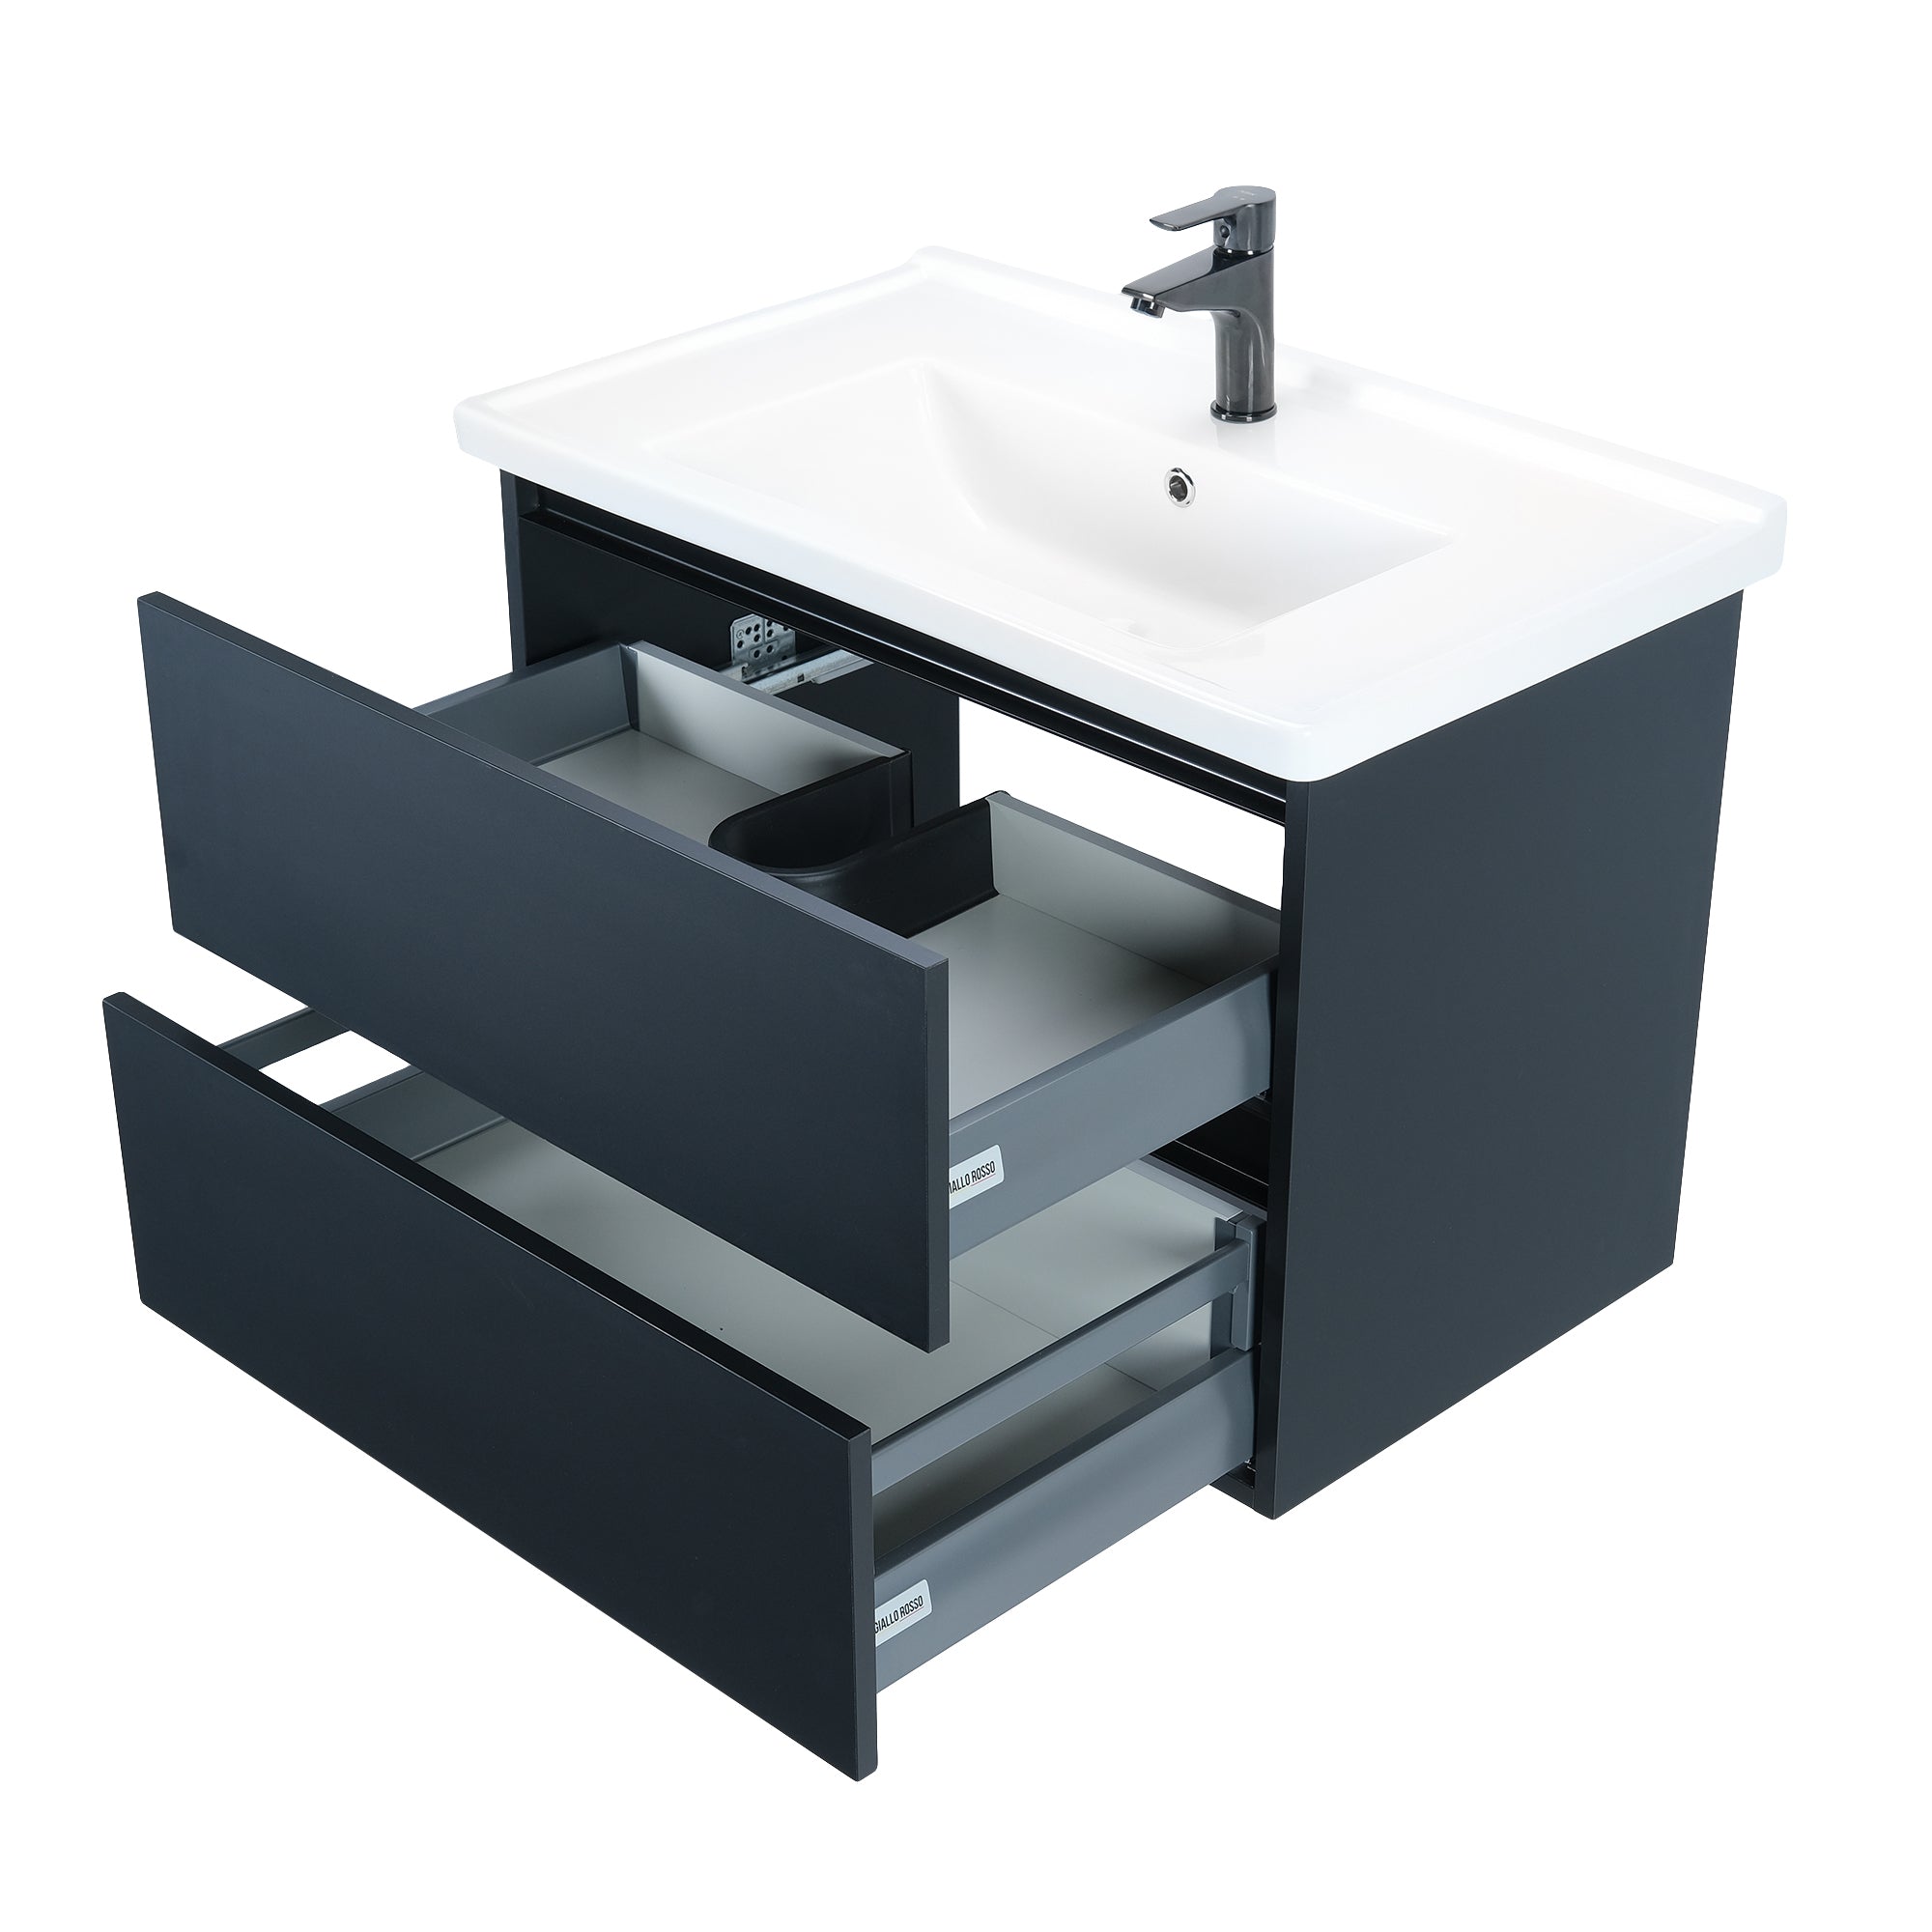 BRASIL 40 INCH MODERN WALL MOUNT VANITY AND SINK COMBO - CHARCOAL GRAY